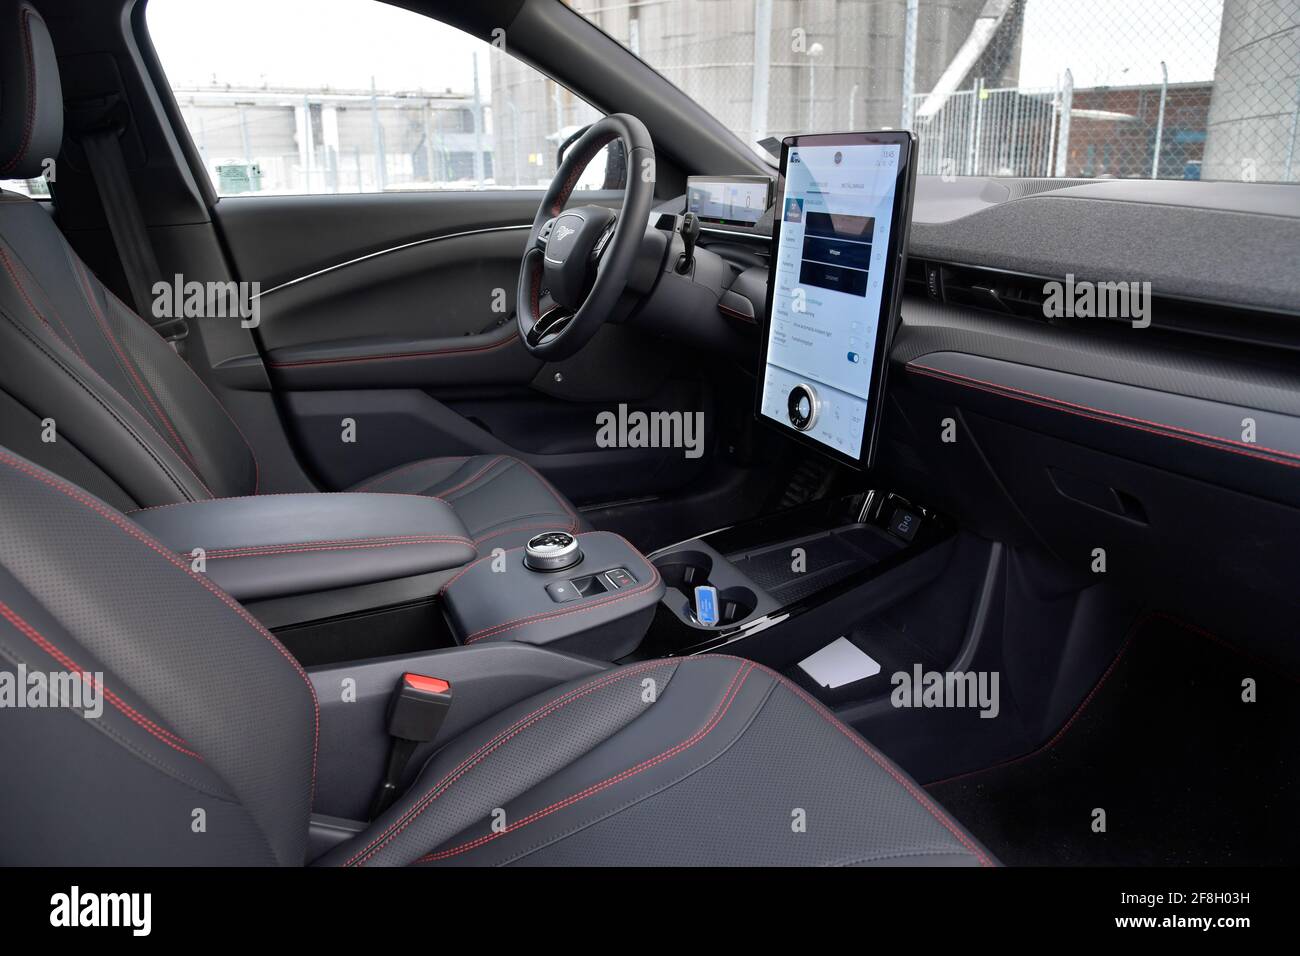 Ford Mustang Mach E Interior Photo Anders Wiklund Tt Code Stock Photo Alamy